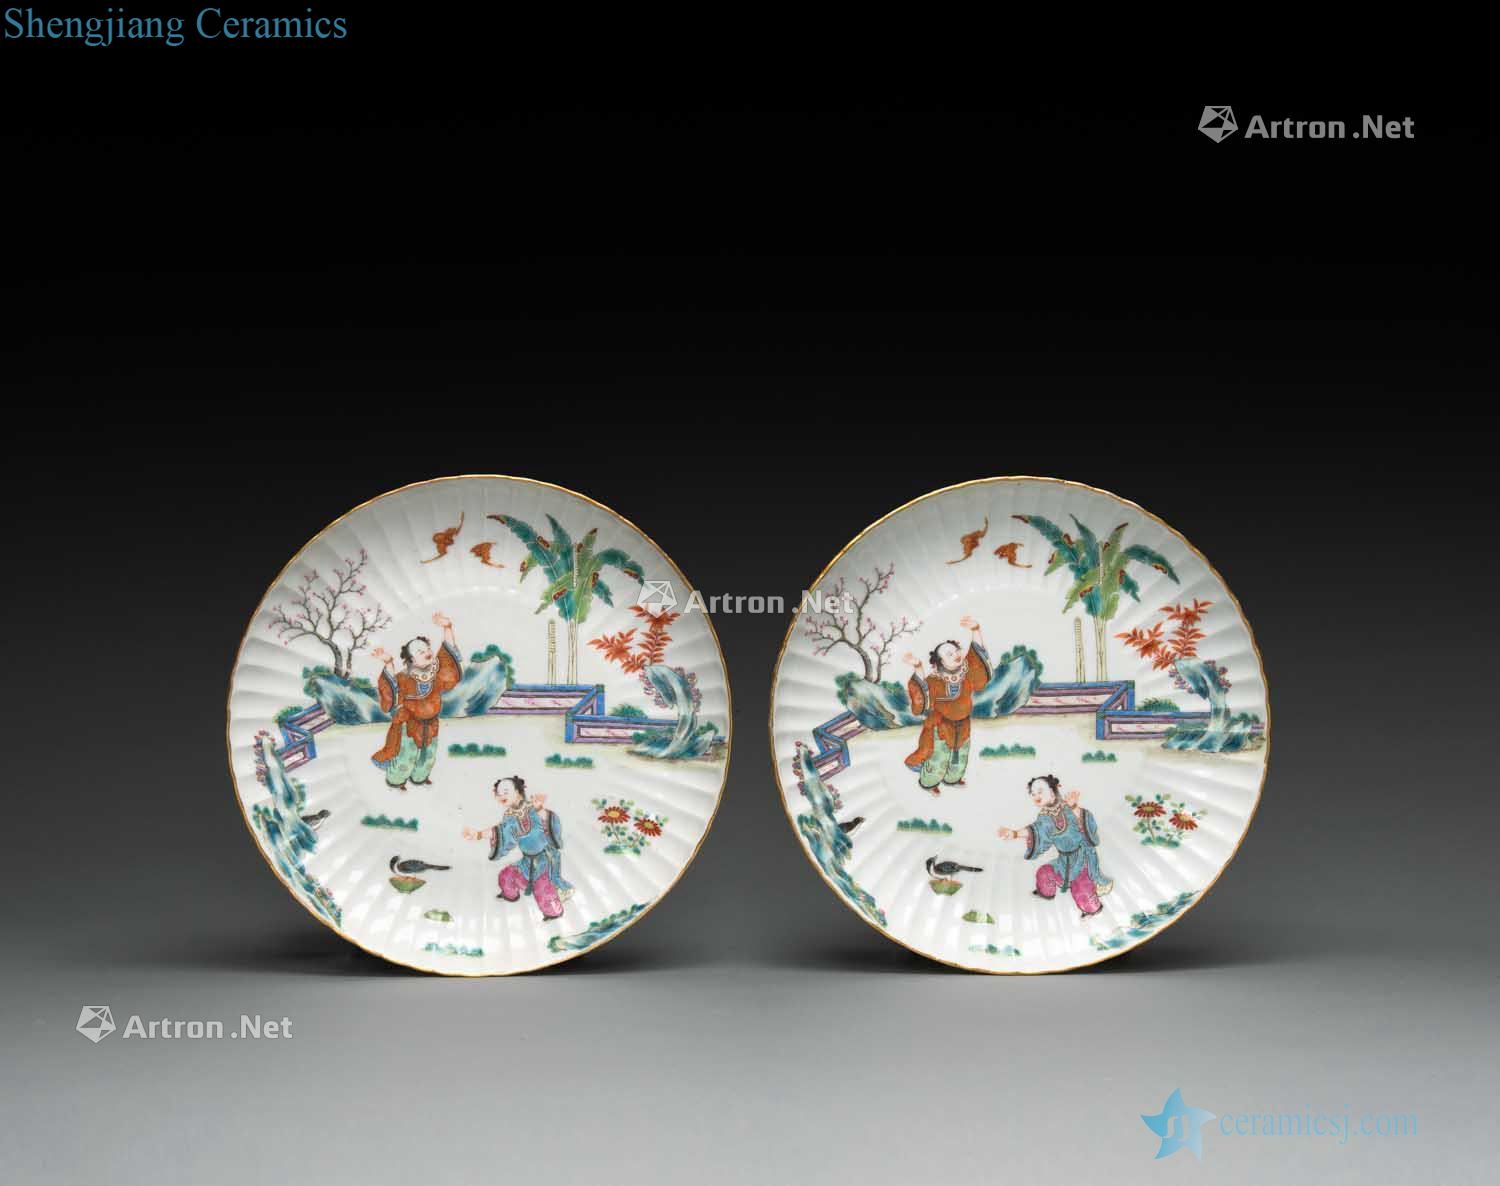 Dajing aligns with the plate of a pair of the enamel baby play